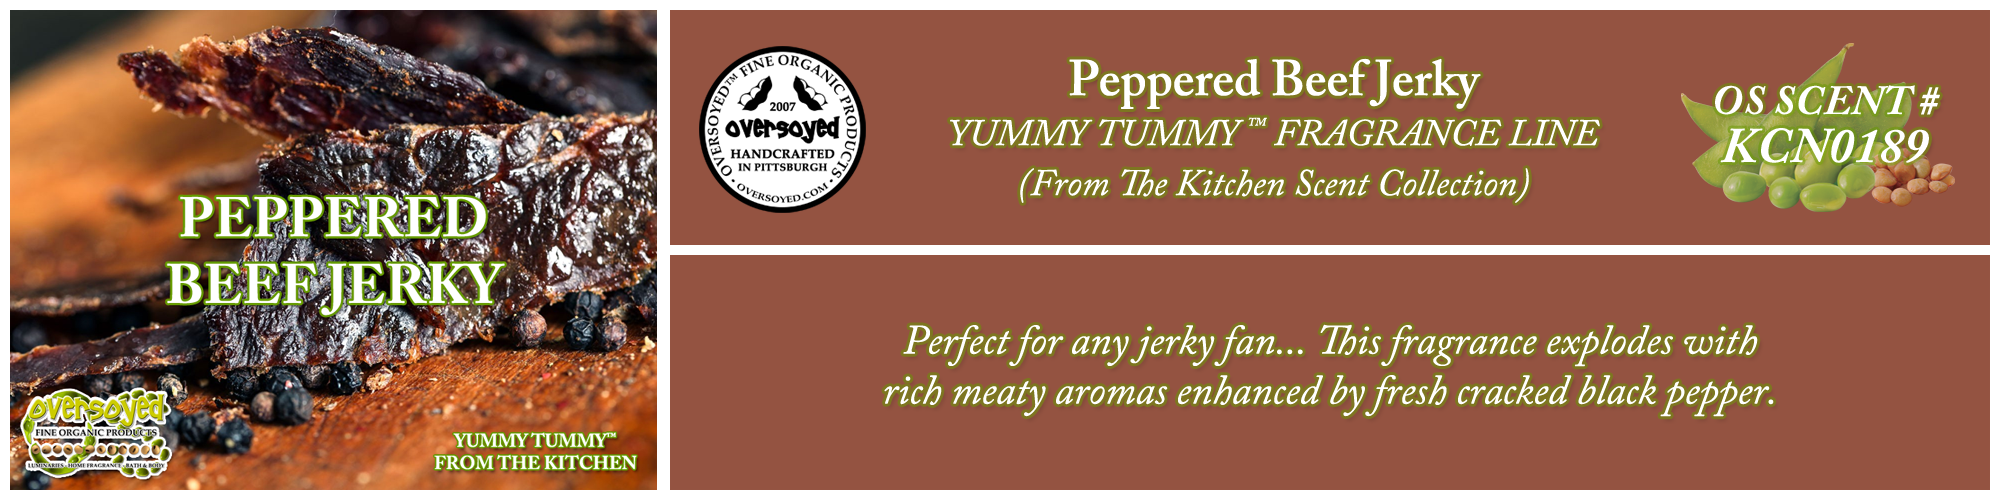 Peppered Beef Jerky Handcrafted Products Collection